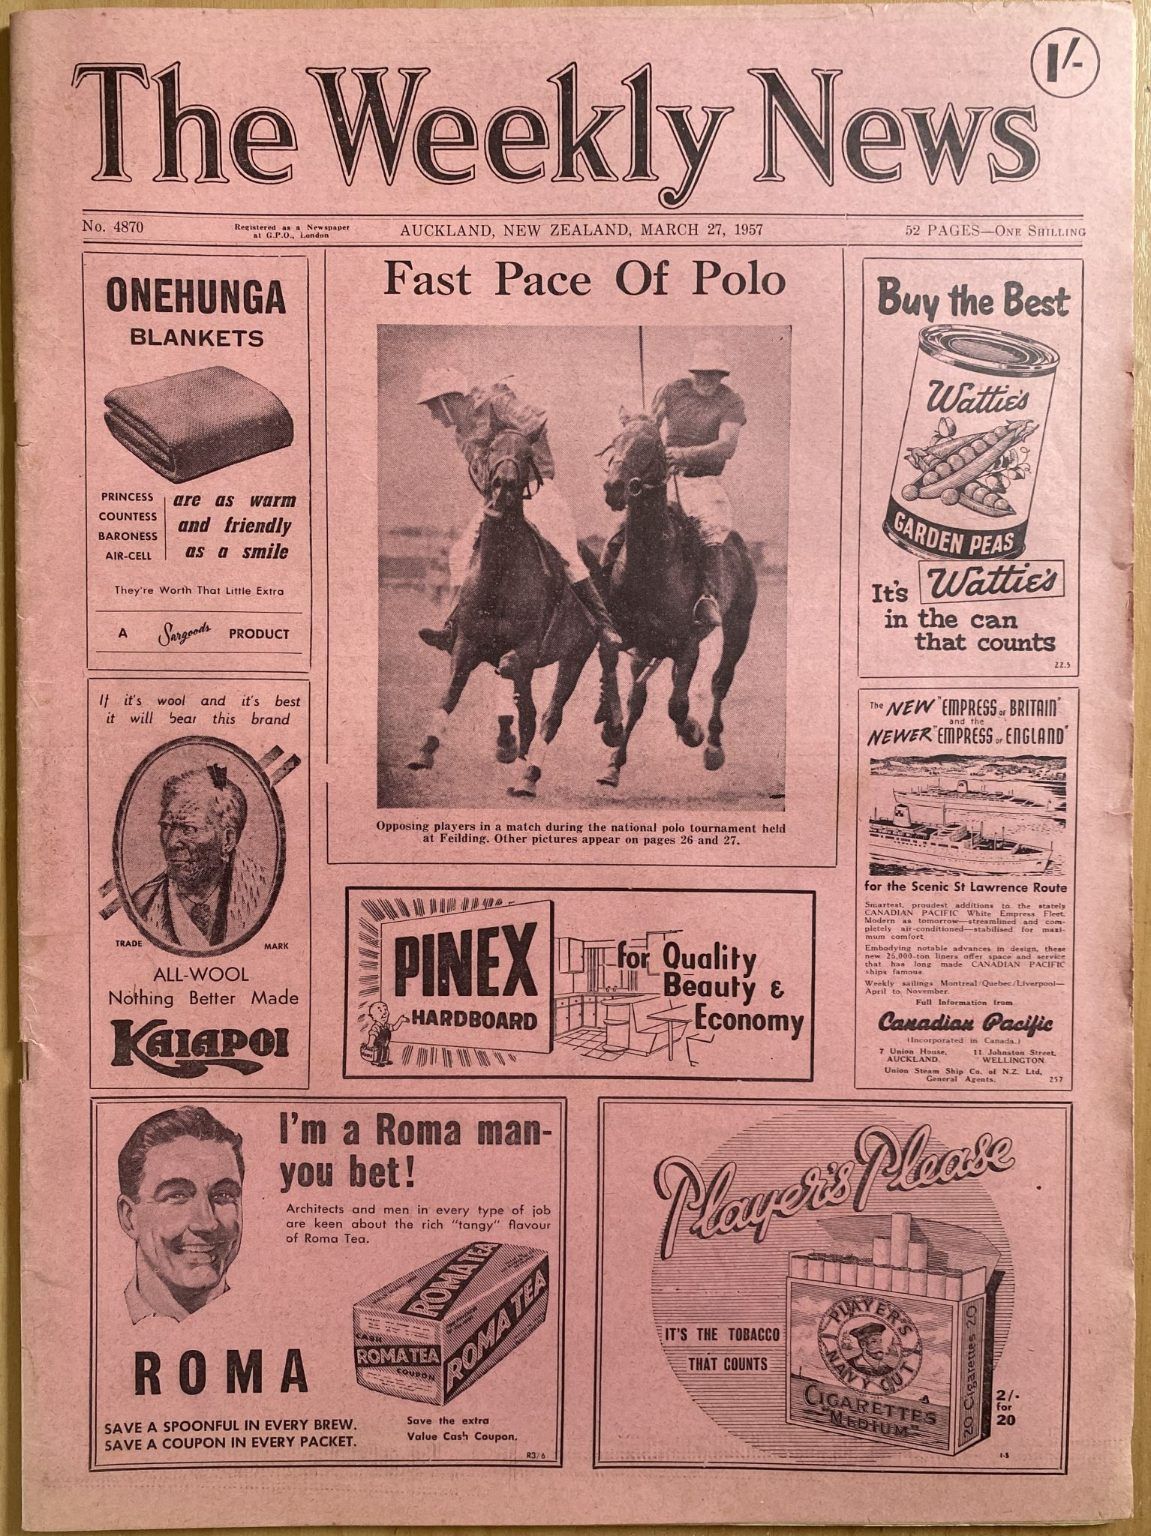 OLD NEWSPAPER: The Weekly News, No. 4870, 27 March 1957